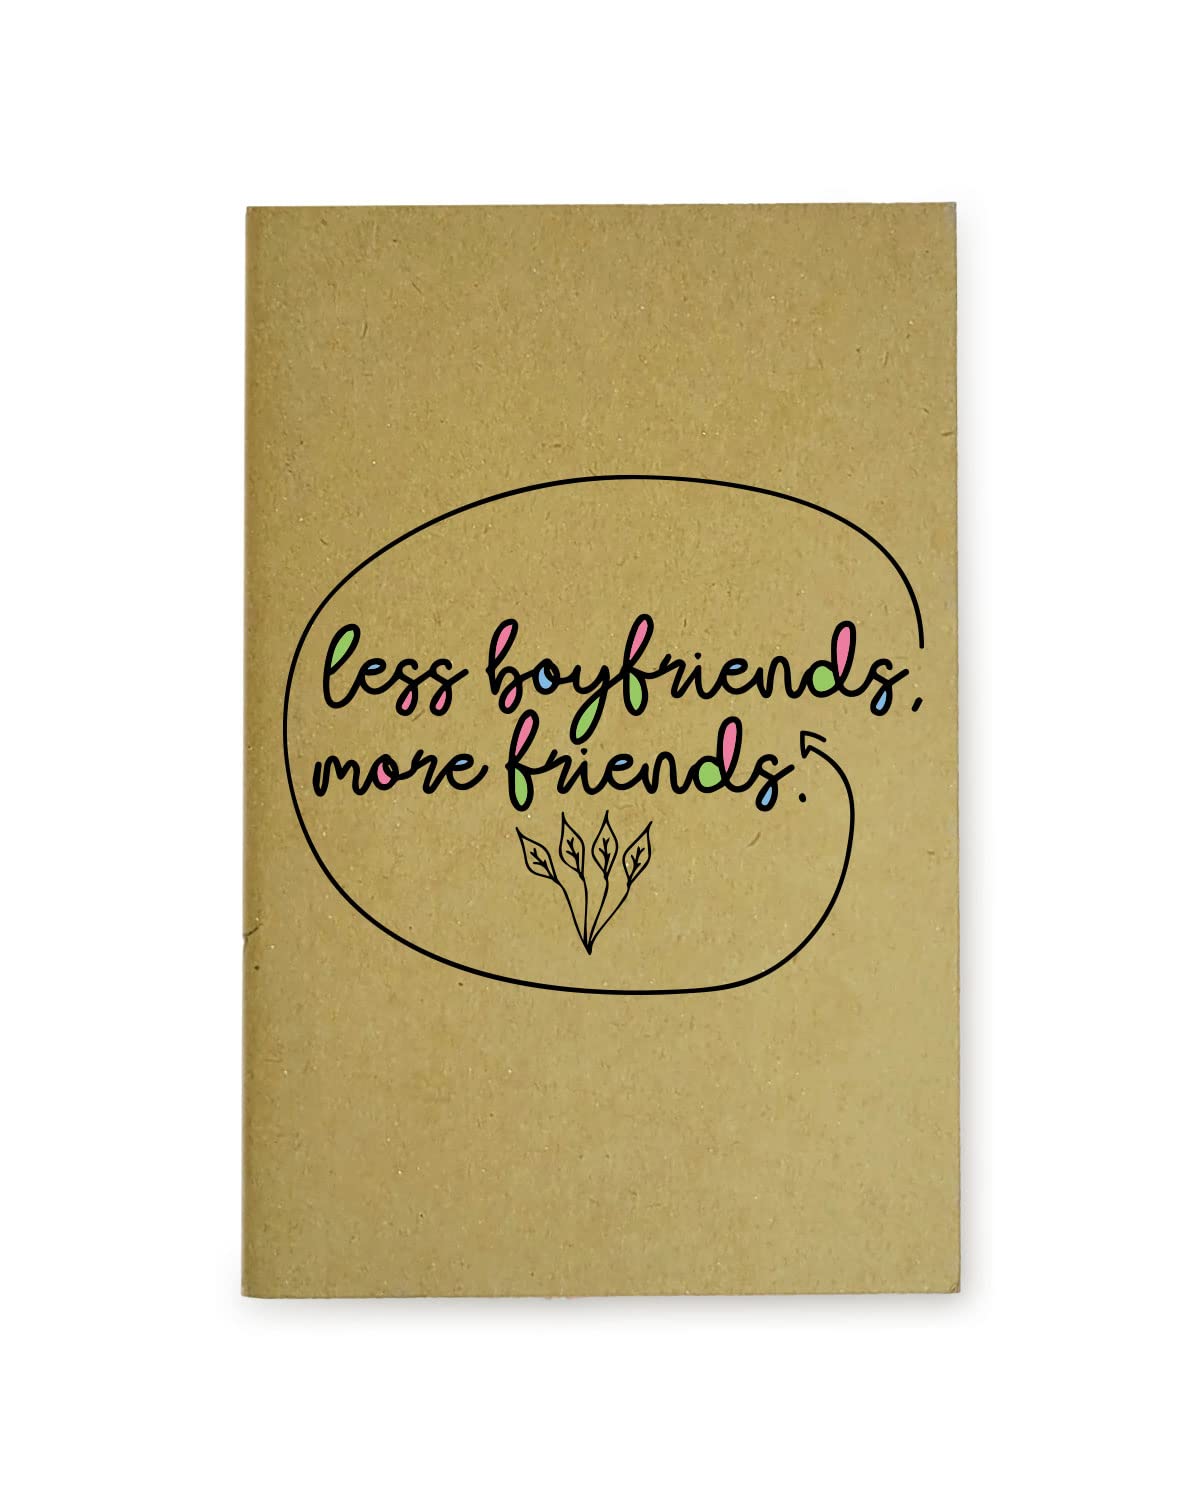 Less Boyfriends More Friends - Brown A5 Doodle Notebook - Handmade - Unruled - 80 Pages - Natural Shade Pages 120 GSM - Funny Quotes & Quirky, Funky designs